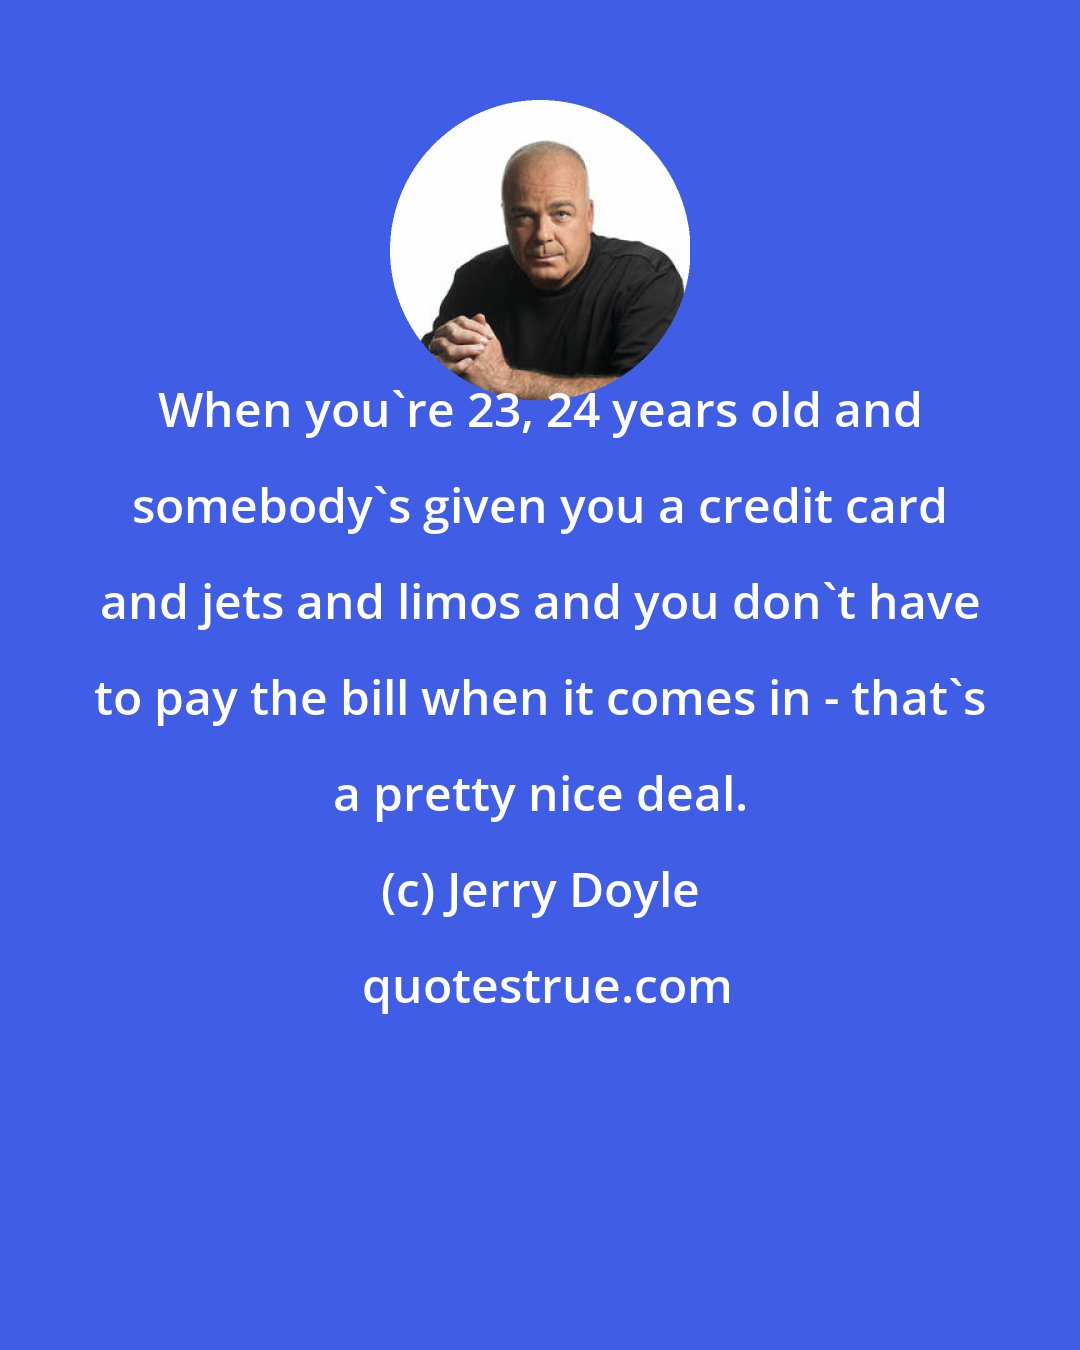 Jerry Doyle: When you're 23, 24 years old and somebody's given you a credit card and jets and limos and you don't have to pay the bill when it comes in - that's a pretty nice deal.